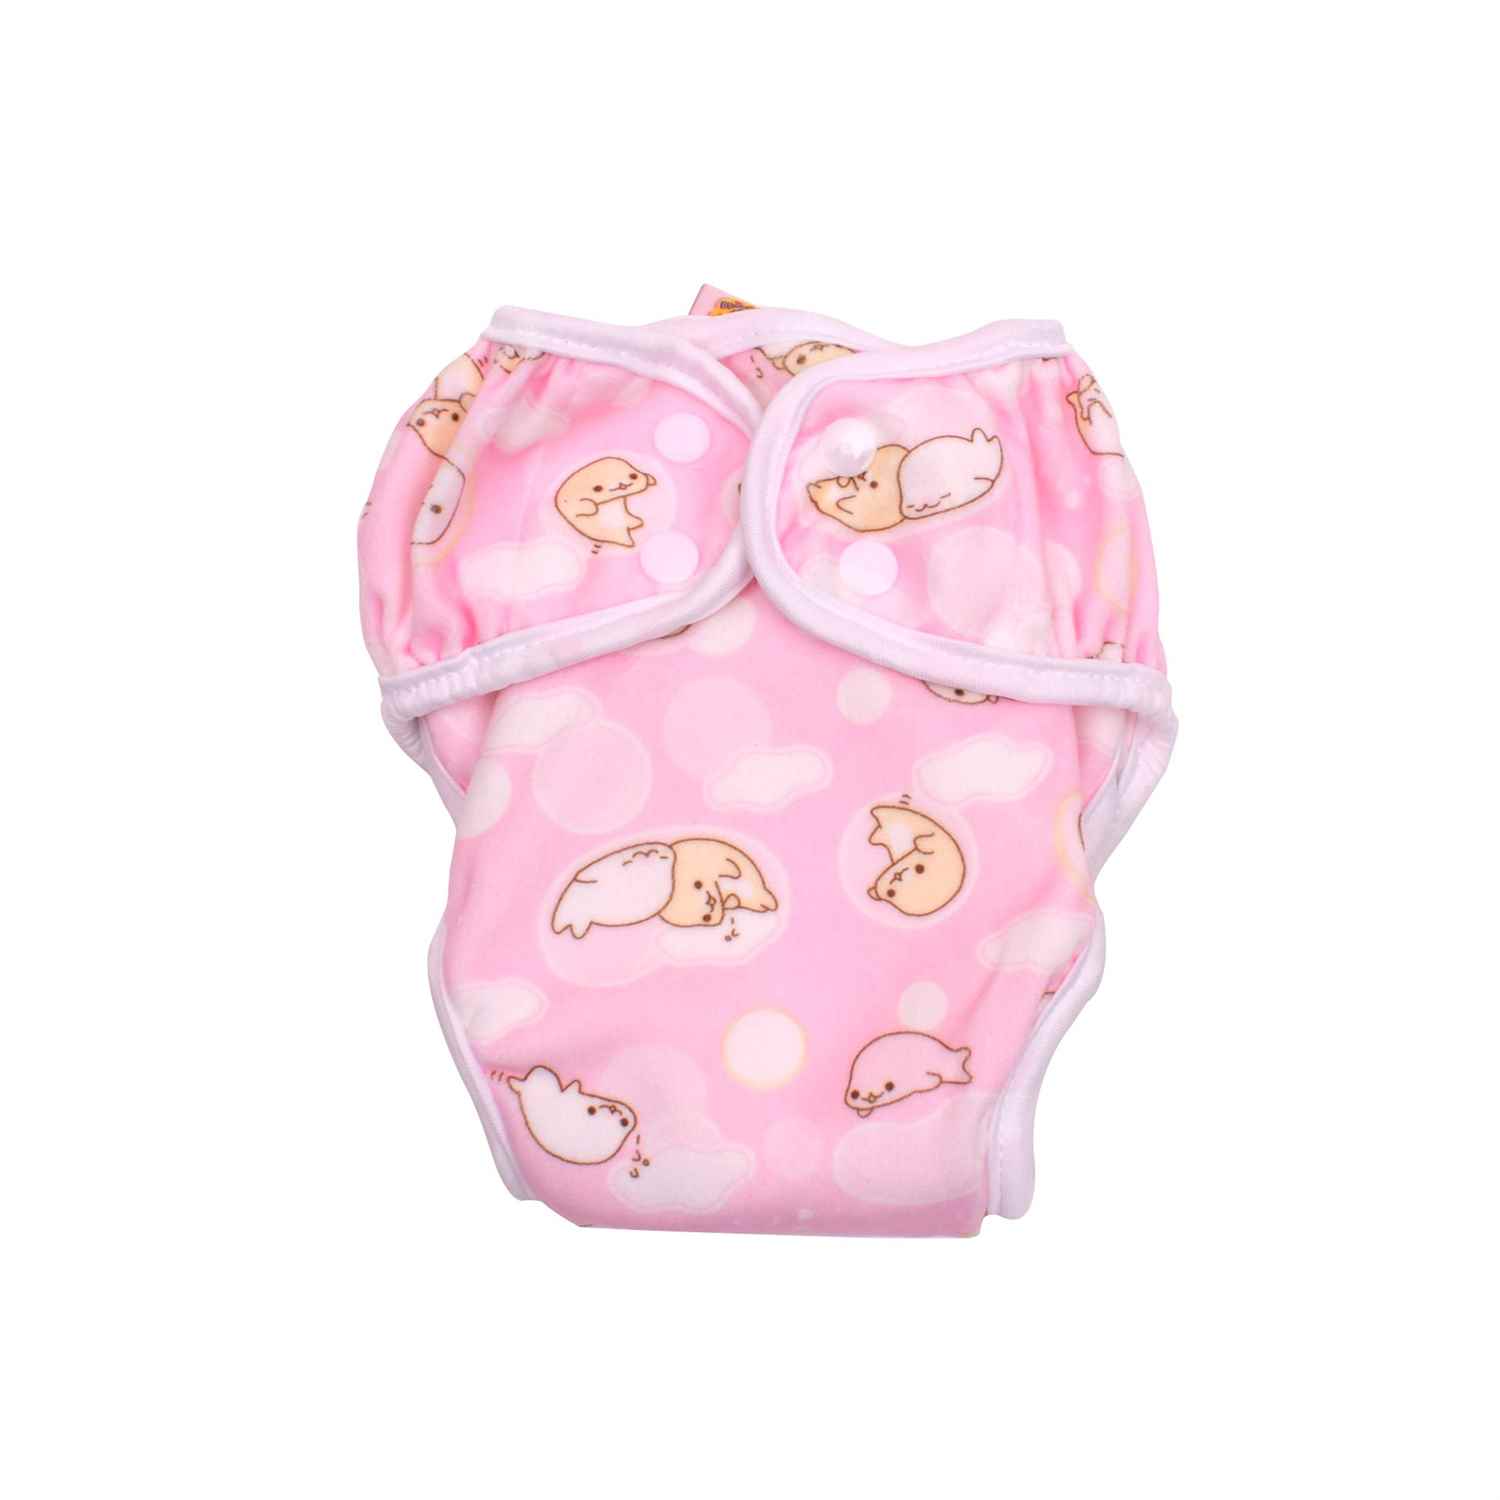 PAW PAW Baby Reusable Fabric Diaper with Pad, Size S (3-6kg)-Pink